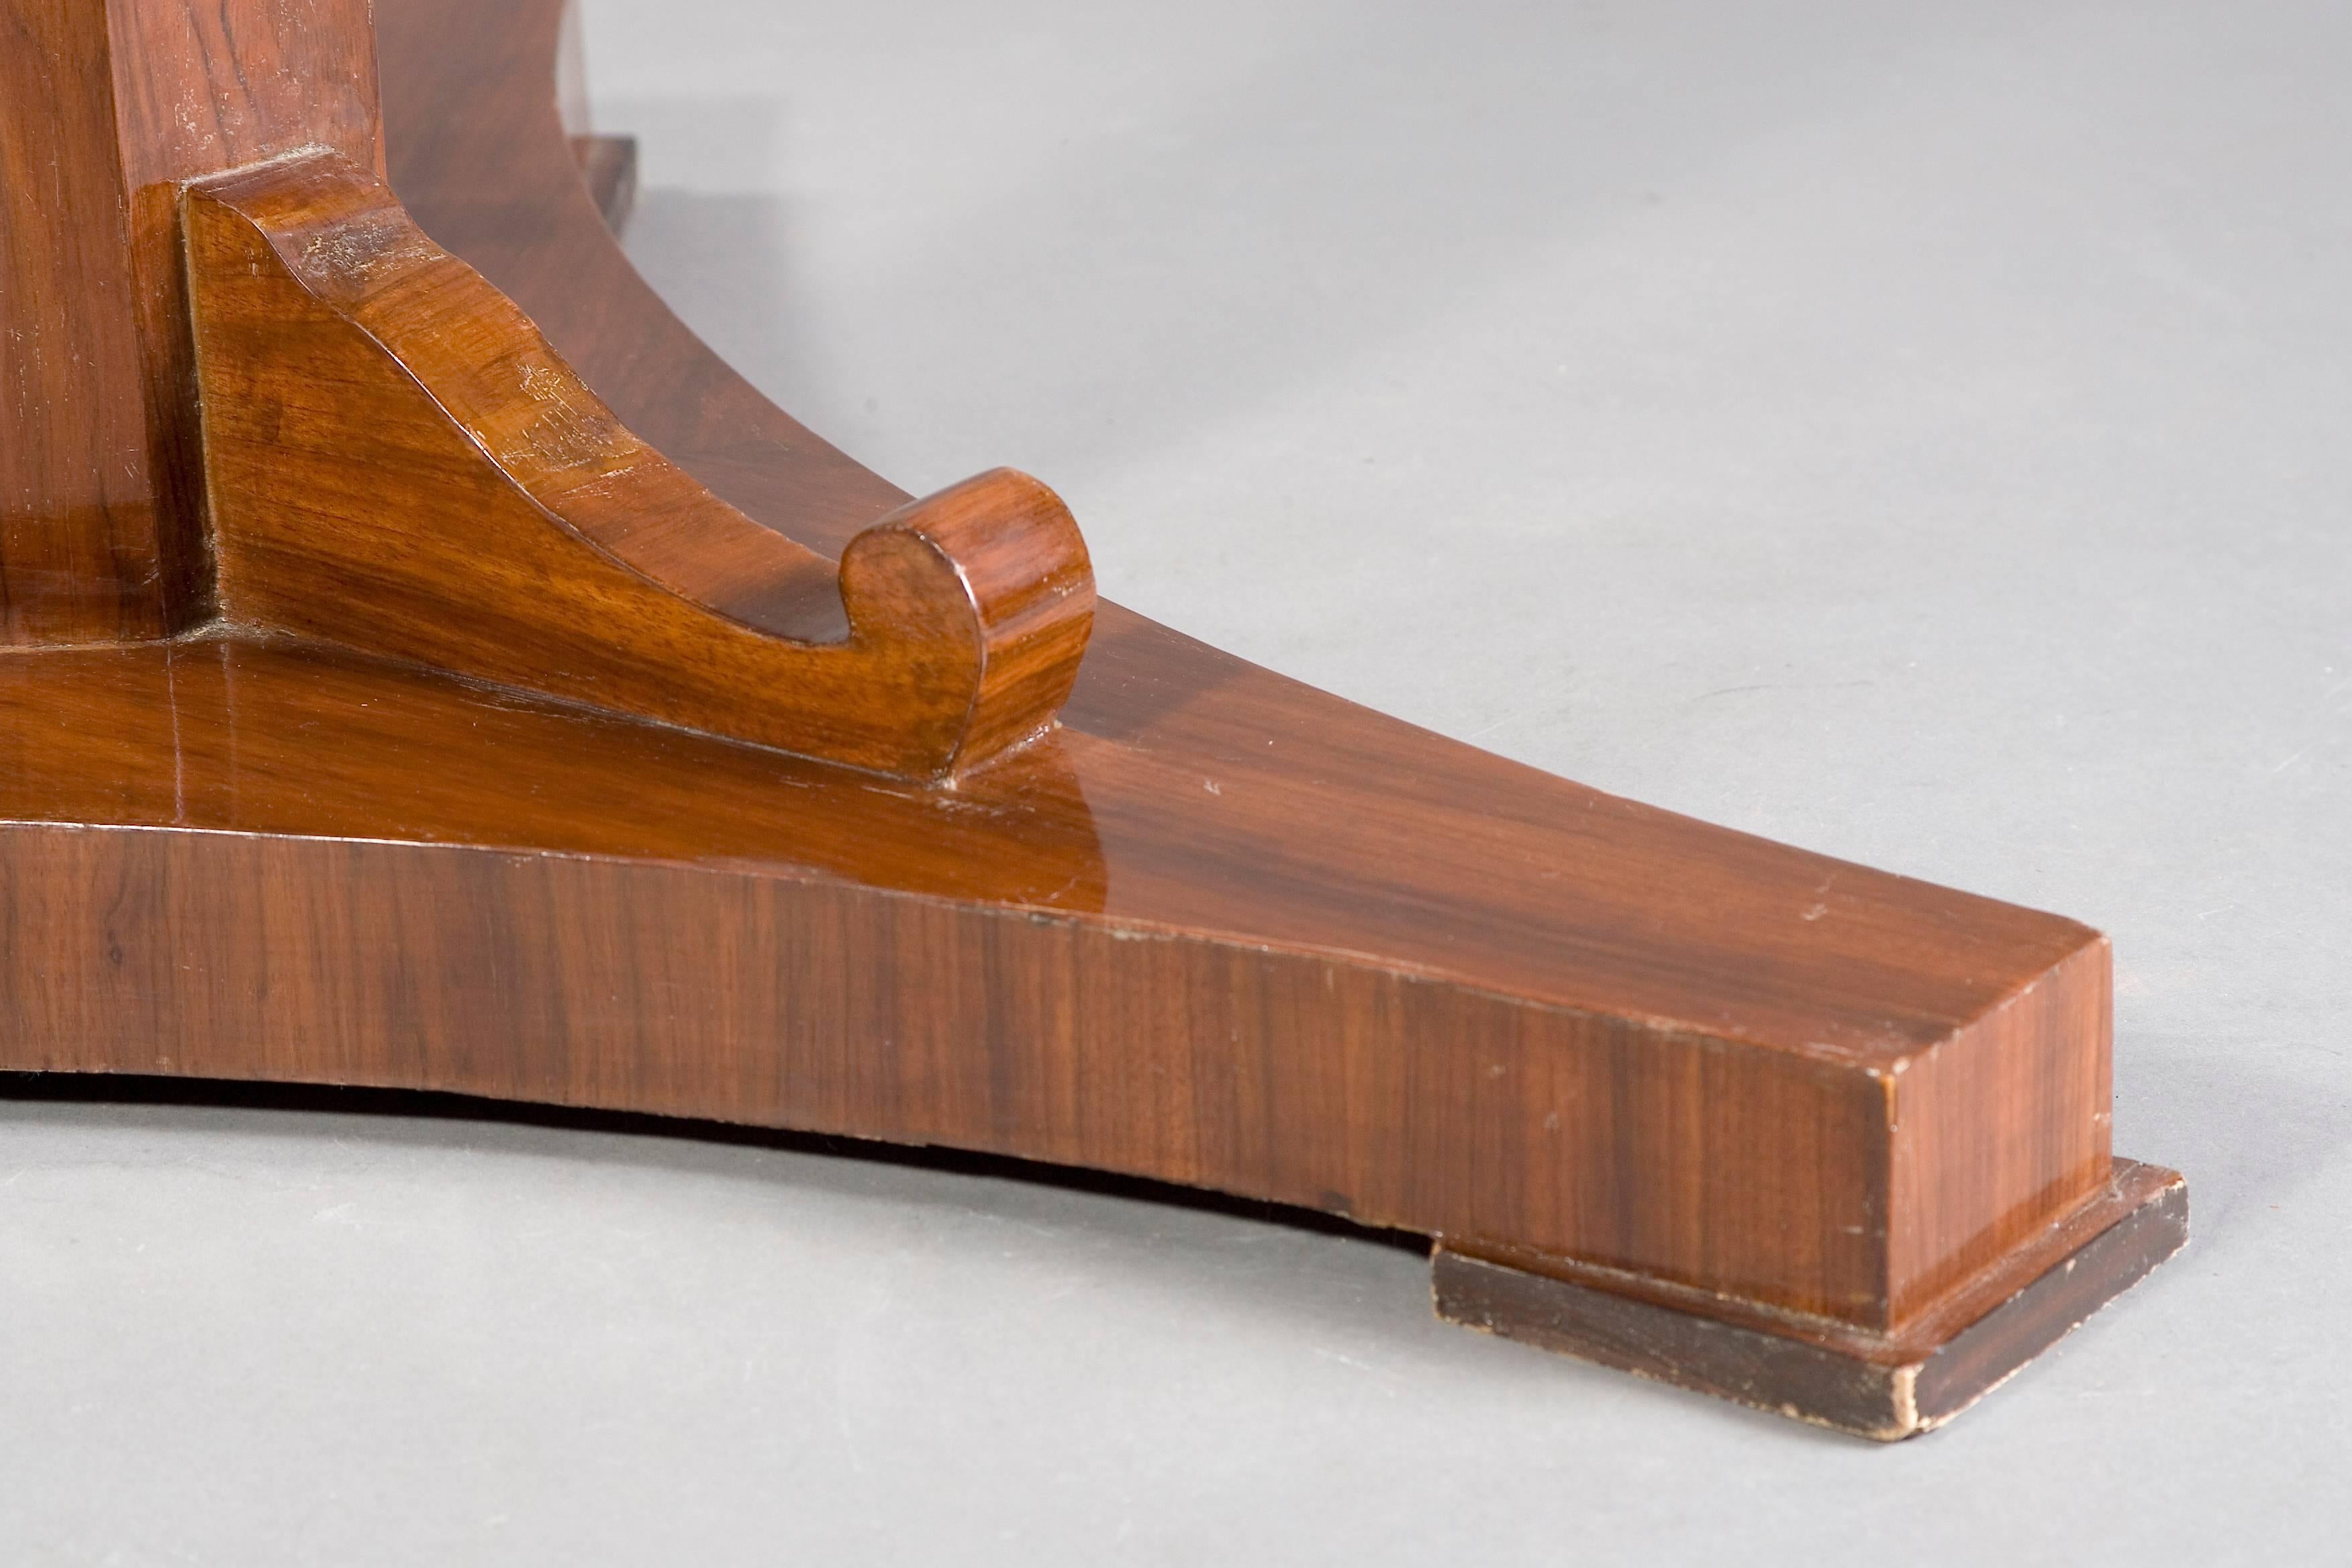 Mahogany on solid wood. Three-sided base plate on. Centrally ascending, eightfold folded column, flanked by three curved volutes. A strict form of early-Biedermeier time. It is equipped with a folding mechanism. This type is very practical, not only